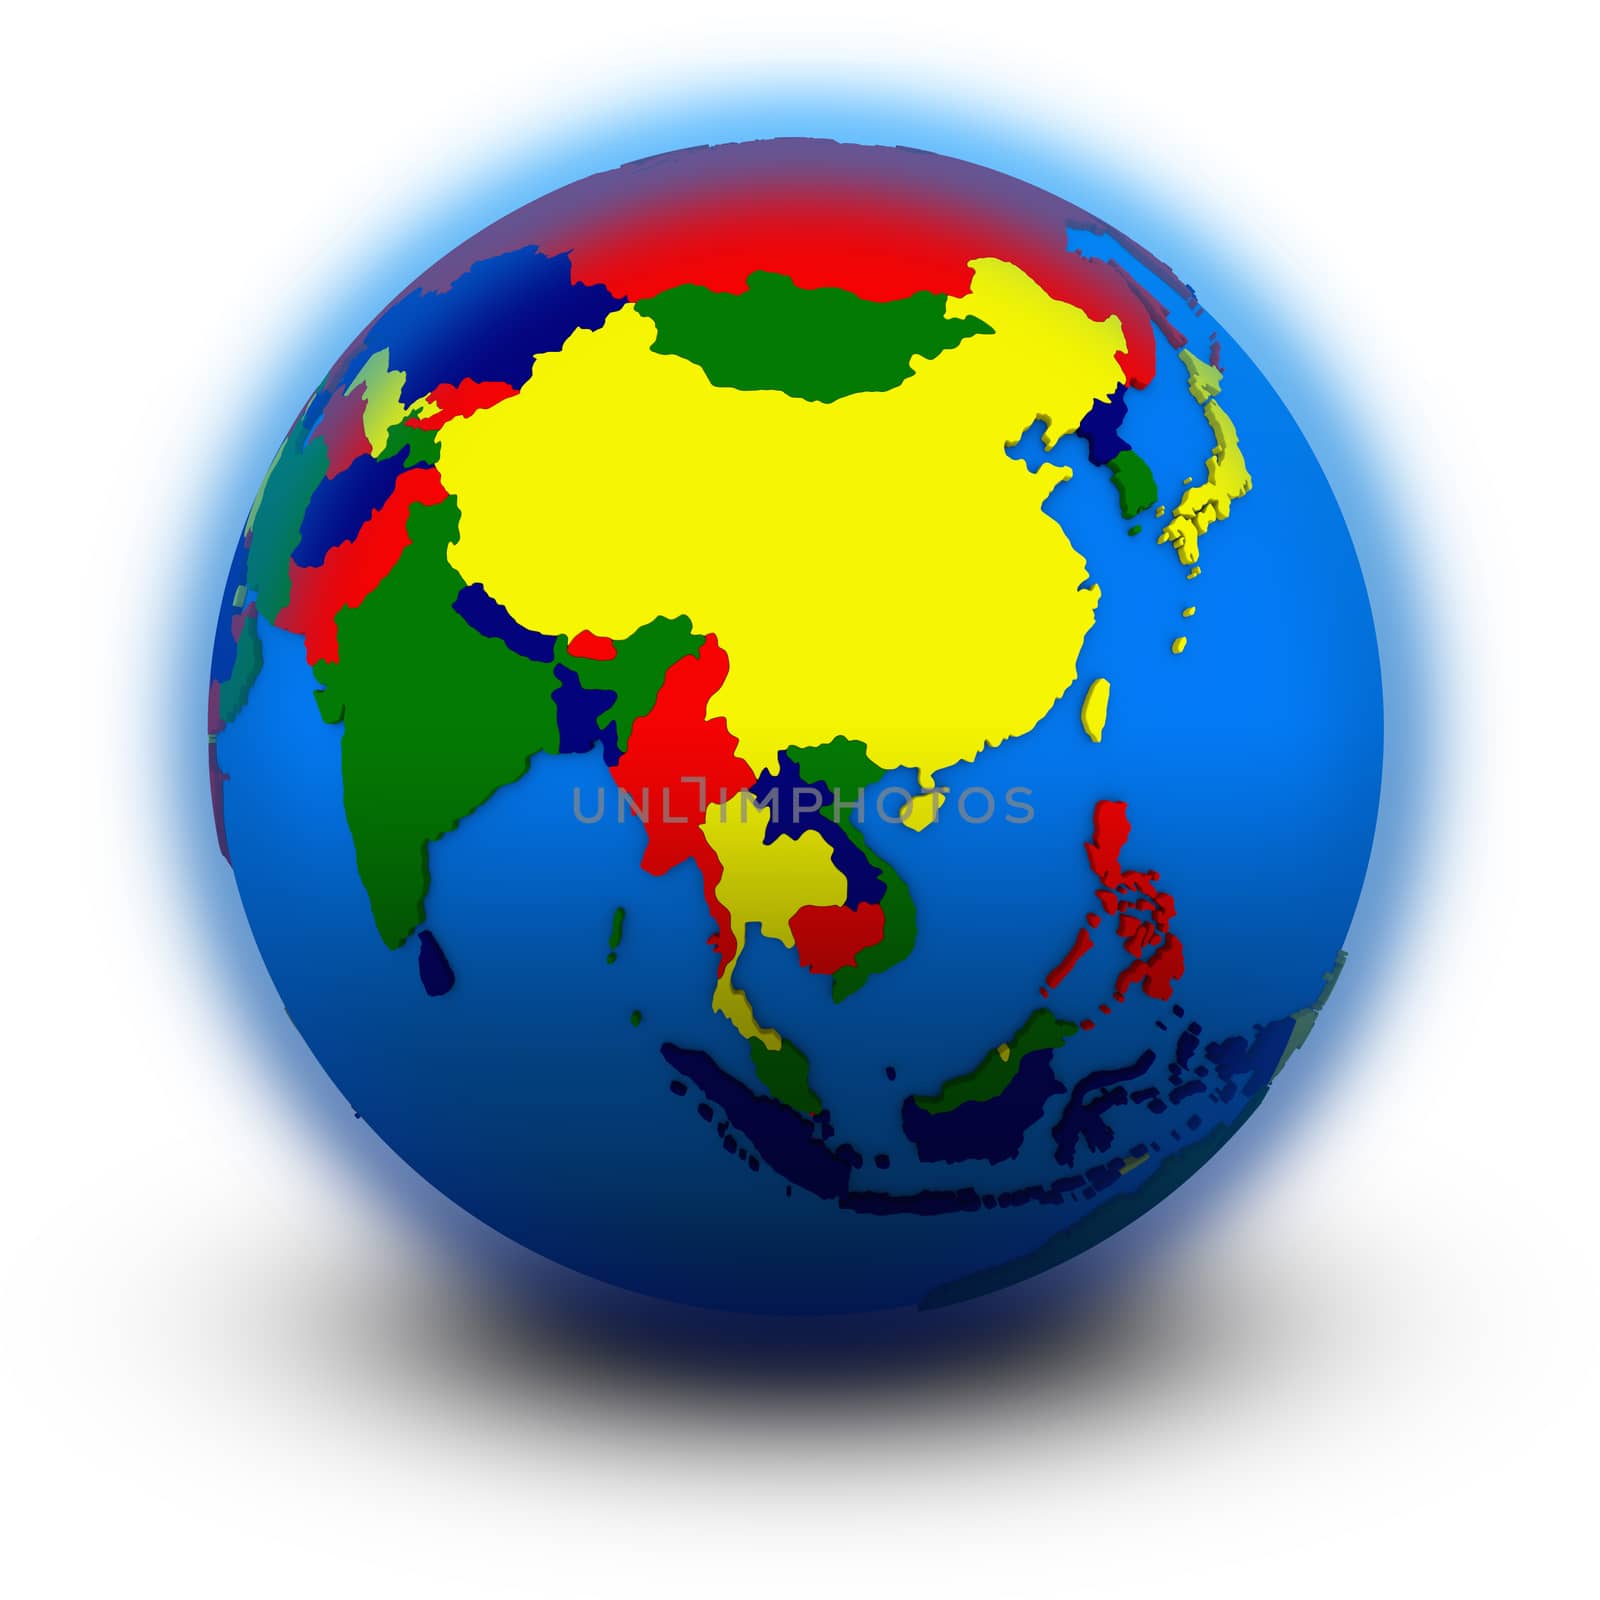 southeast Asia on political globe by Harvepino